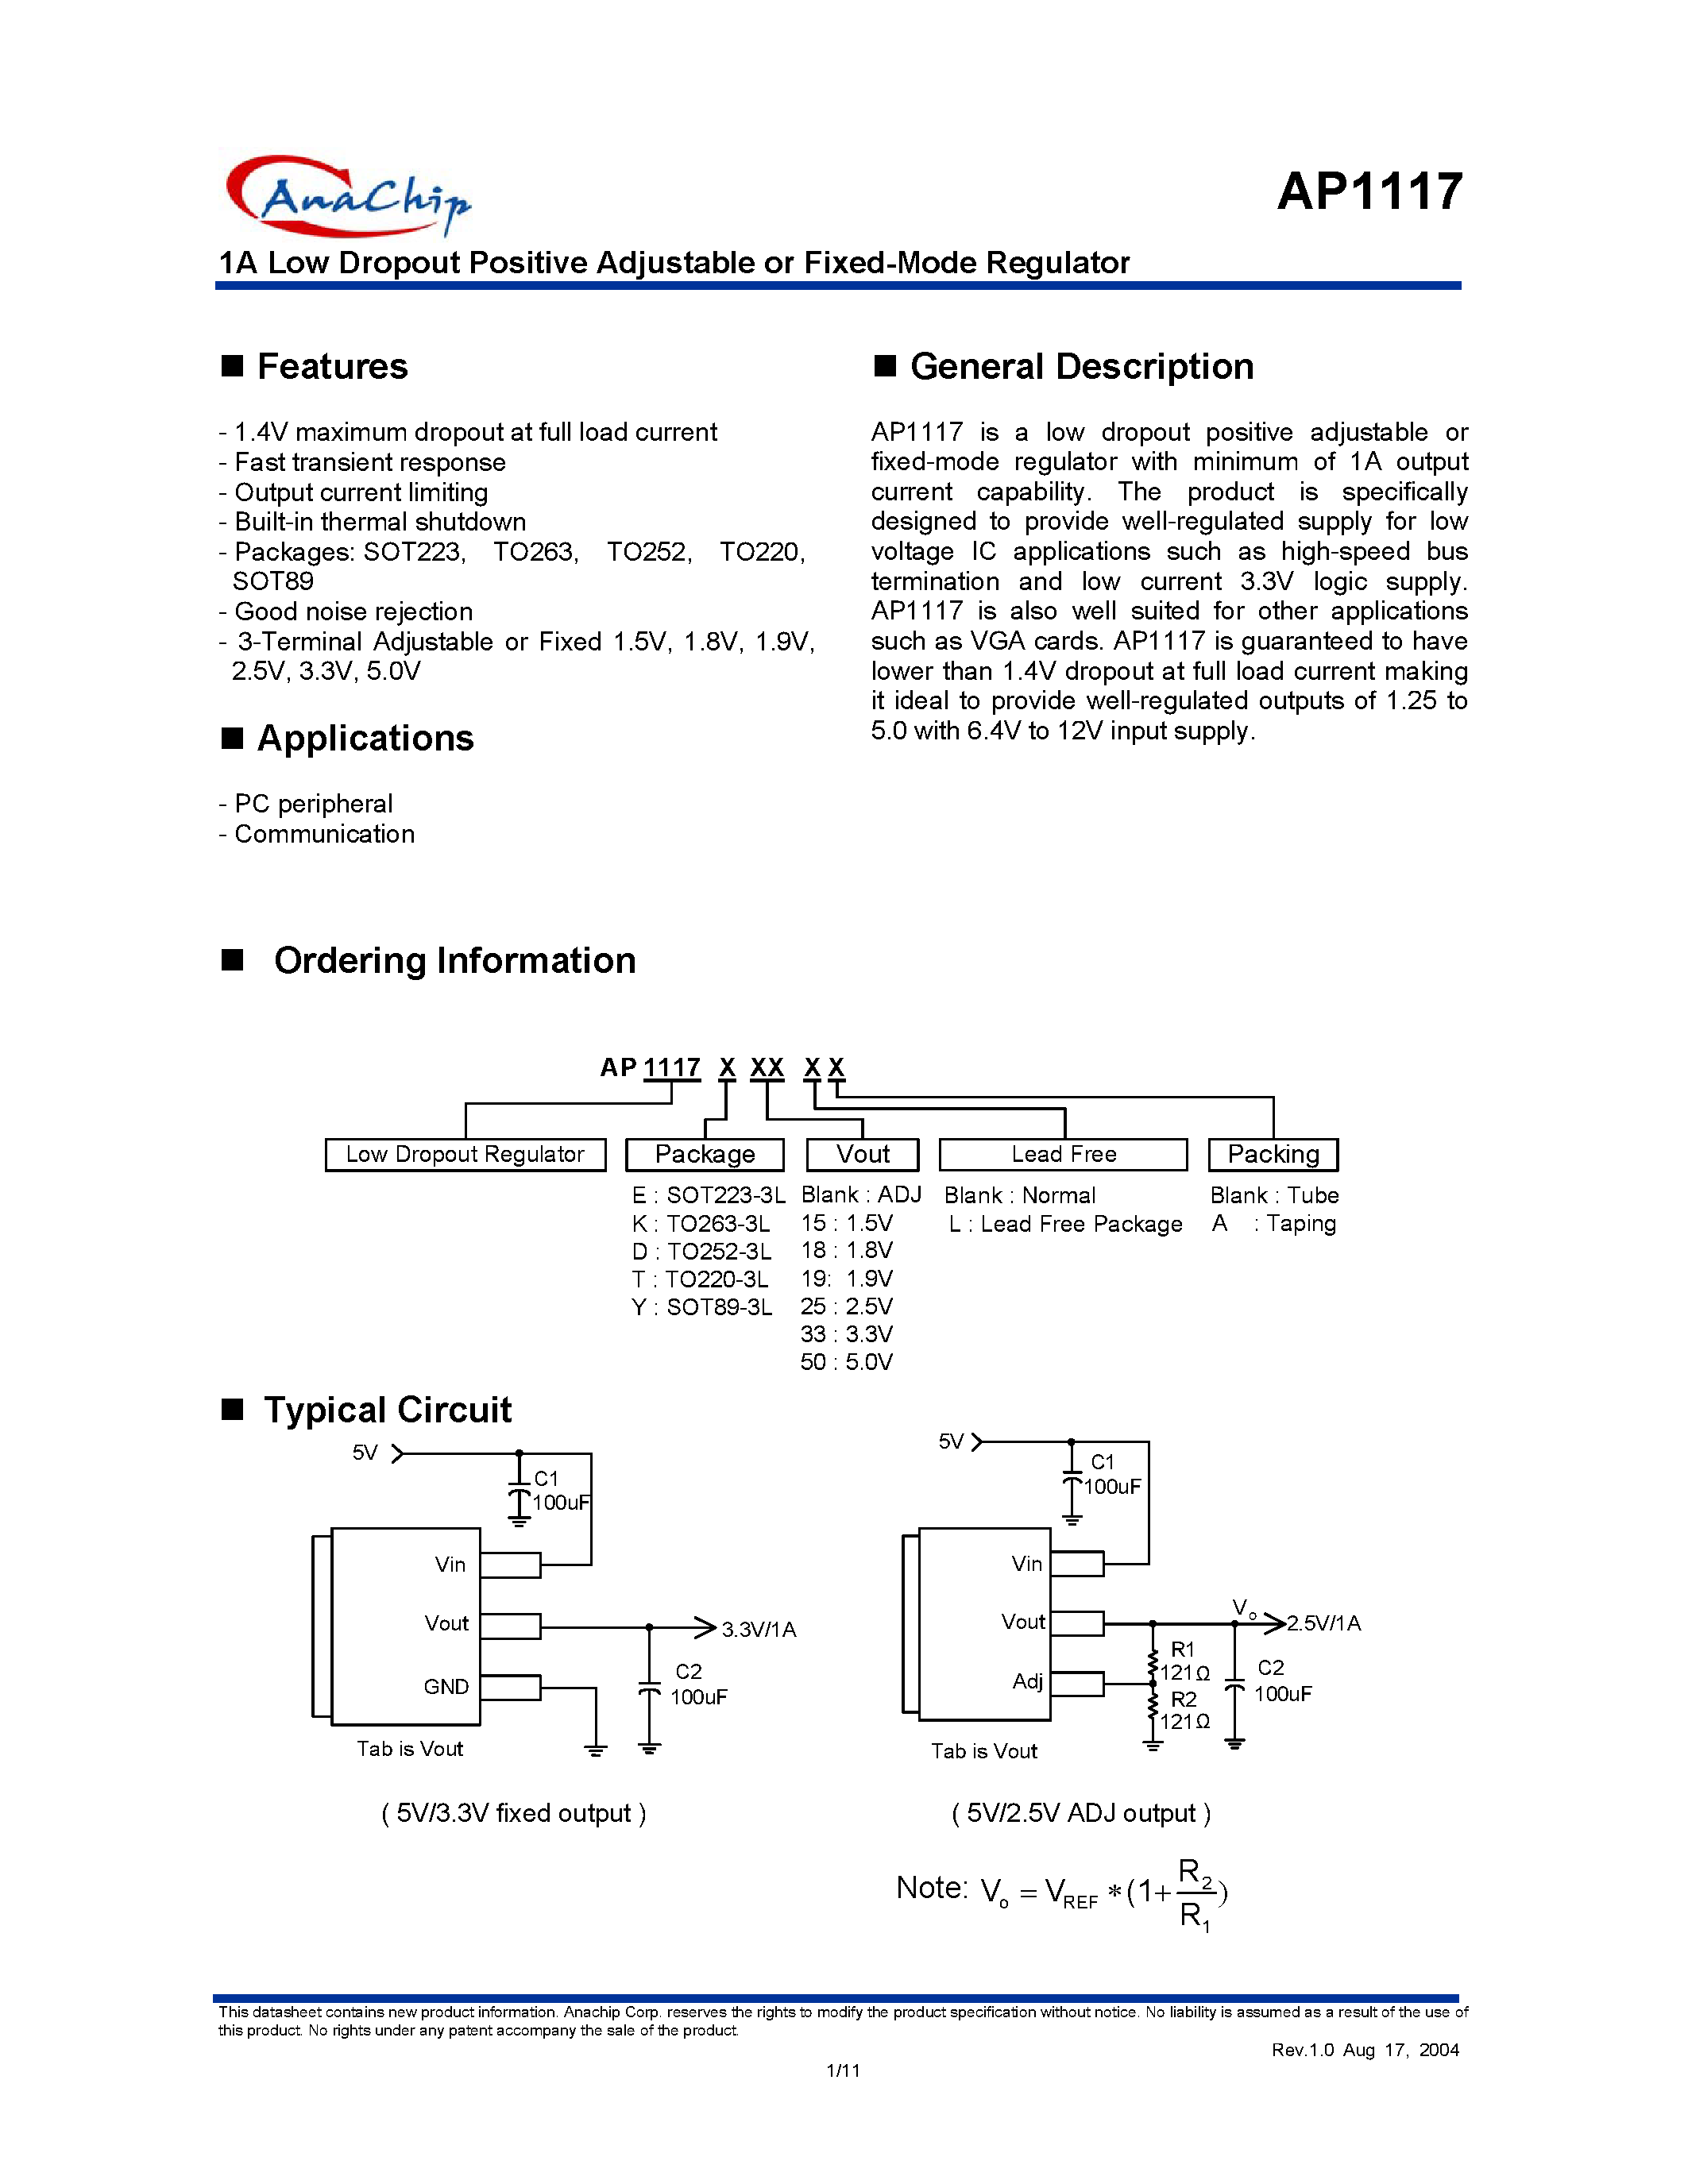 Datasheet AP1117-1.9 - 1A Low Dropout Positive Adjustable or Fixed-Mode Regulator page 1